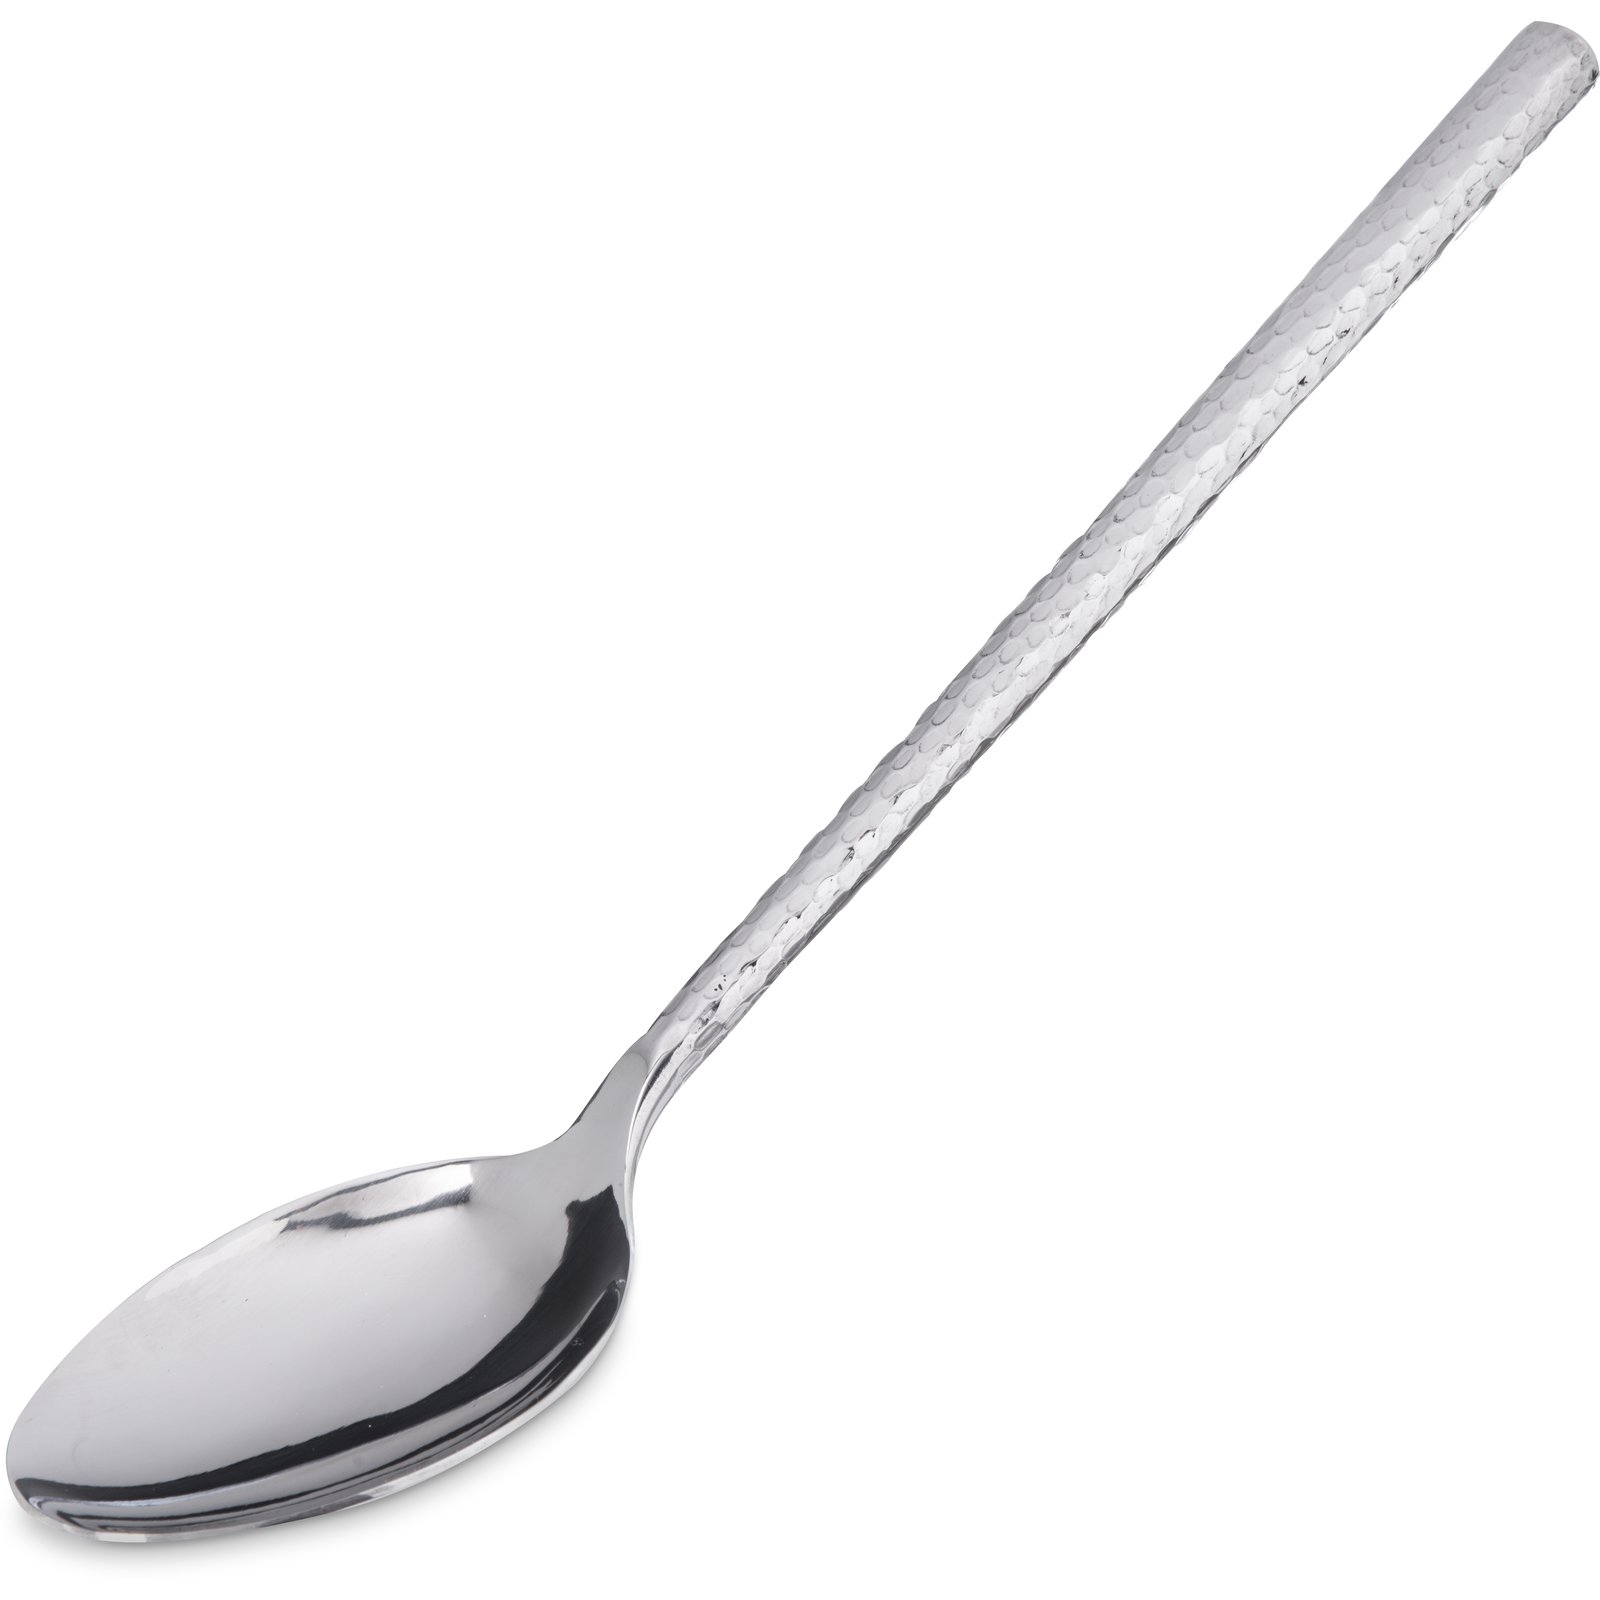 Large Steel Cooking Spoon Size: 36 cm No.: 084-13-08-24